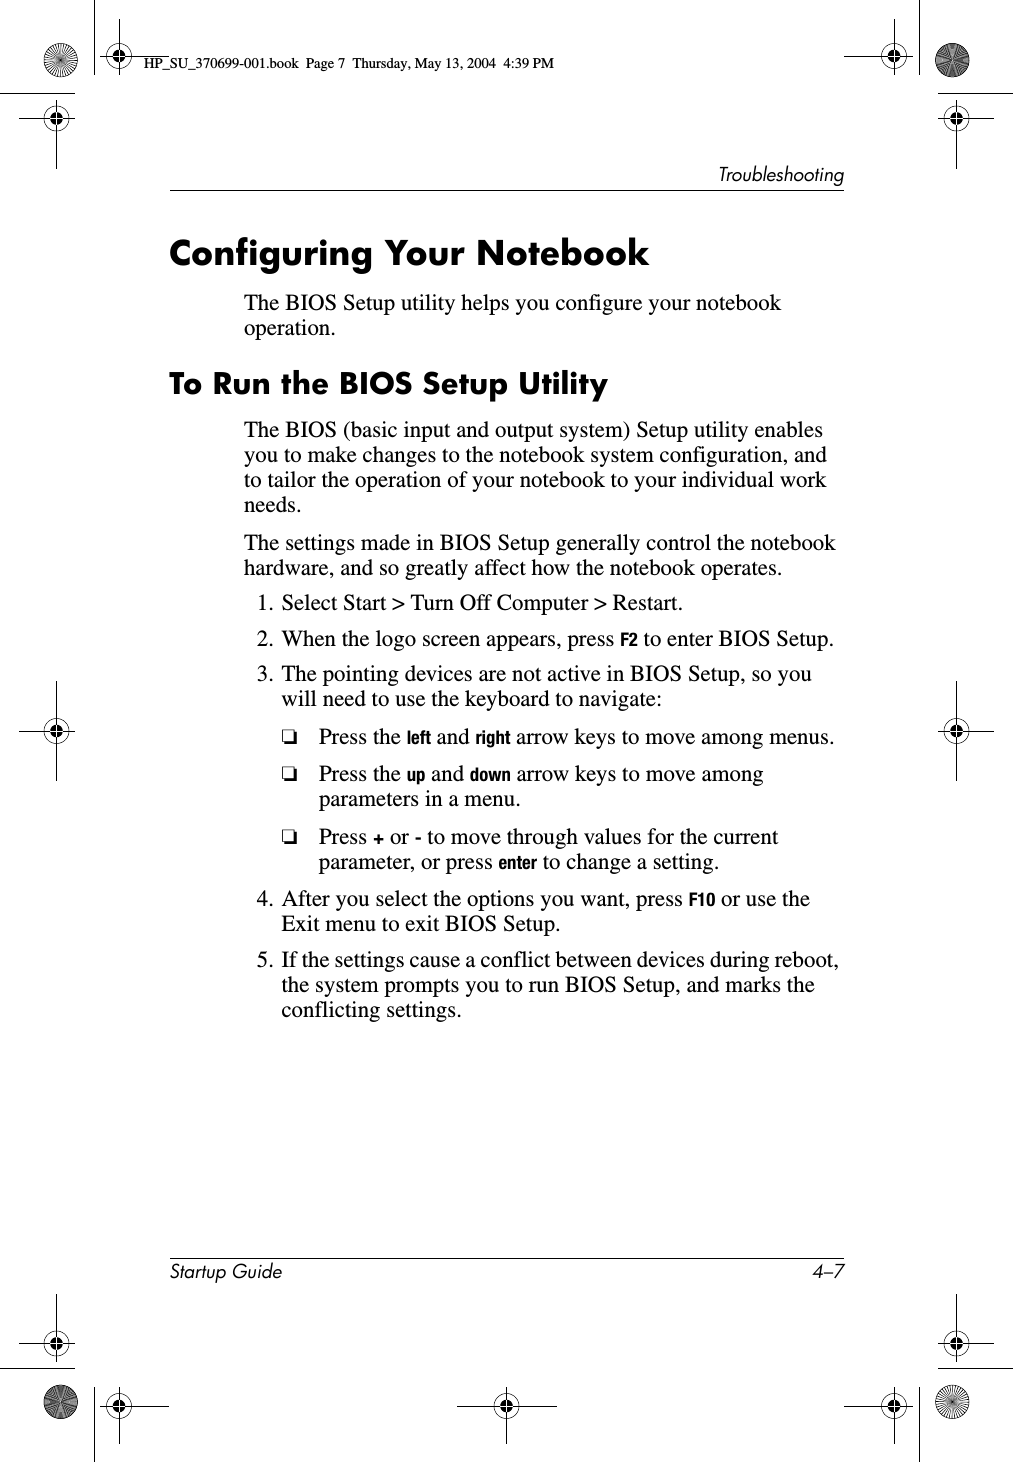 TroubleshootingStartup Guide 4–7Configuring Your NotebookThe BIOS Setup utility helps you configure your notebook operation.To Run the BIOS Setup UtilityThe BIOS (basic input and output system) Setup utility enables you to make changes to the notebook system configuration, and to tailor the operation of your notebook to your individual work needs.The settings made in BIOS Setup generally control the notebook hardware, and so greatly affect how the notebook operates. 1. Select Start &gt; Turn Off Computer &gt; Restart.2. When the logo screen appears, press F2 to enter BIOS Setup.3. The pointing devices are not active in BIOS Setup, so you will need to use the keyboard to navigate:❏Press the left and right arrow keys to move among menus.❏Press the up and down arrow keys to move among parameters in a menu.❏Press + or - to move through values for the current parameter, or press enter to change a setting.4. After you select the options you want, press F10 or use the Exit menu to exit BIOS Setup.5. If the settings cause a conflict between devices during reboot, the system prompts you to run BIOS Setup, and marks the conflicting settings. HP_SU_370699-001.book  Page 7  Thursday, May 13, 2004  4:39 PM